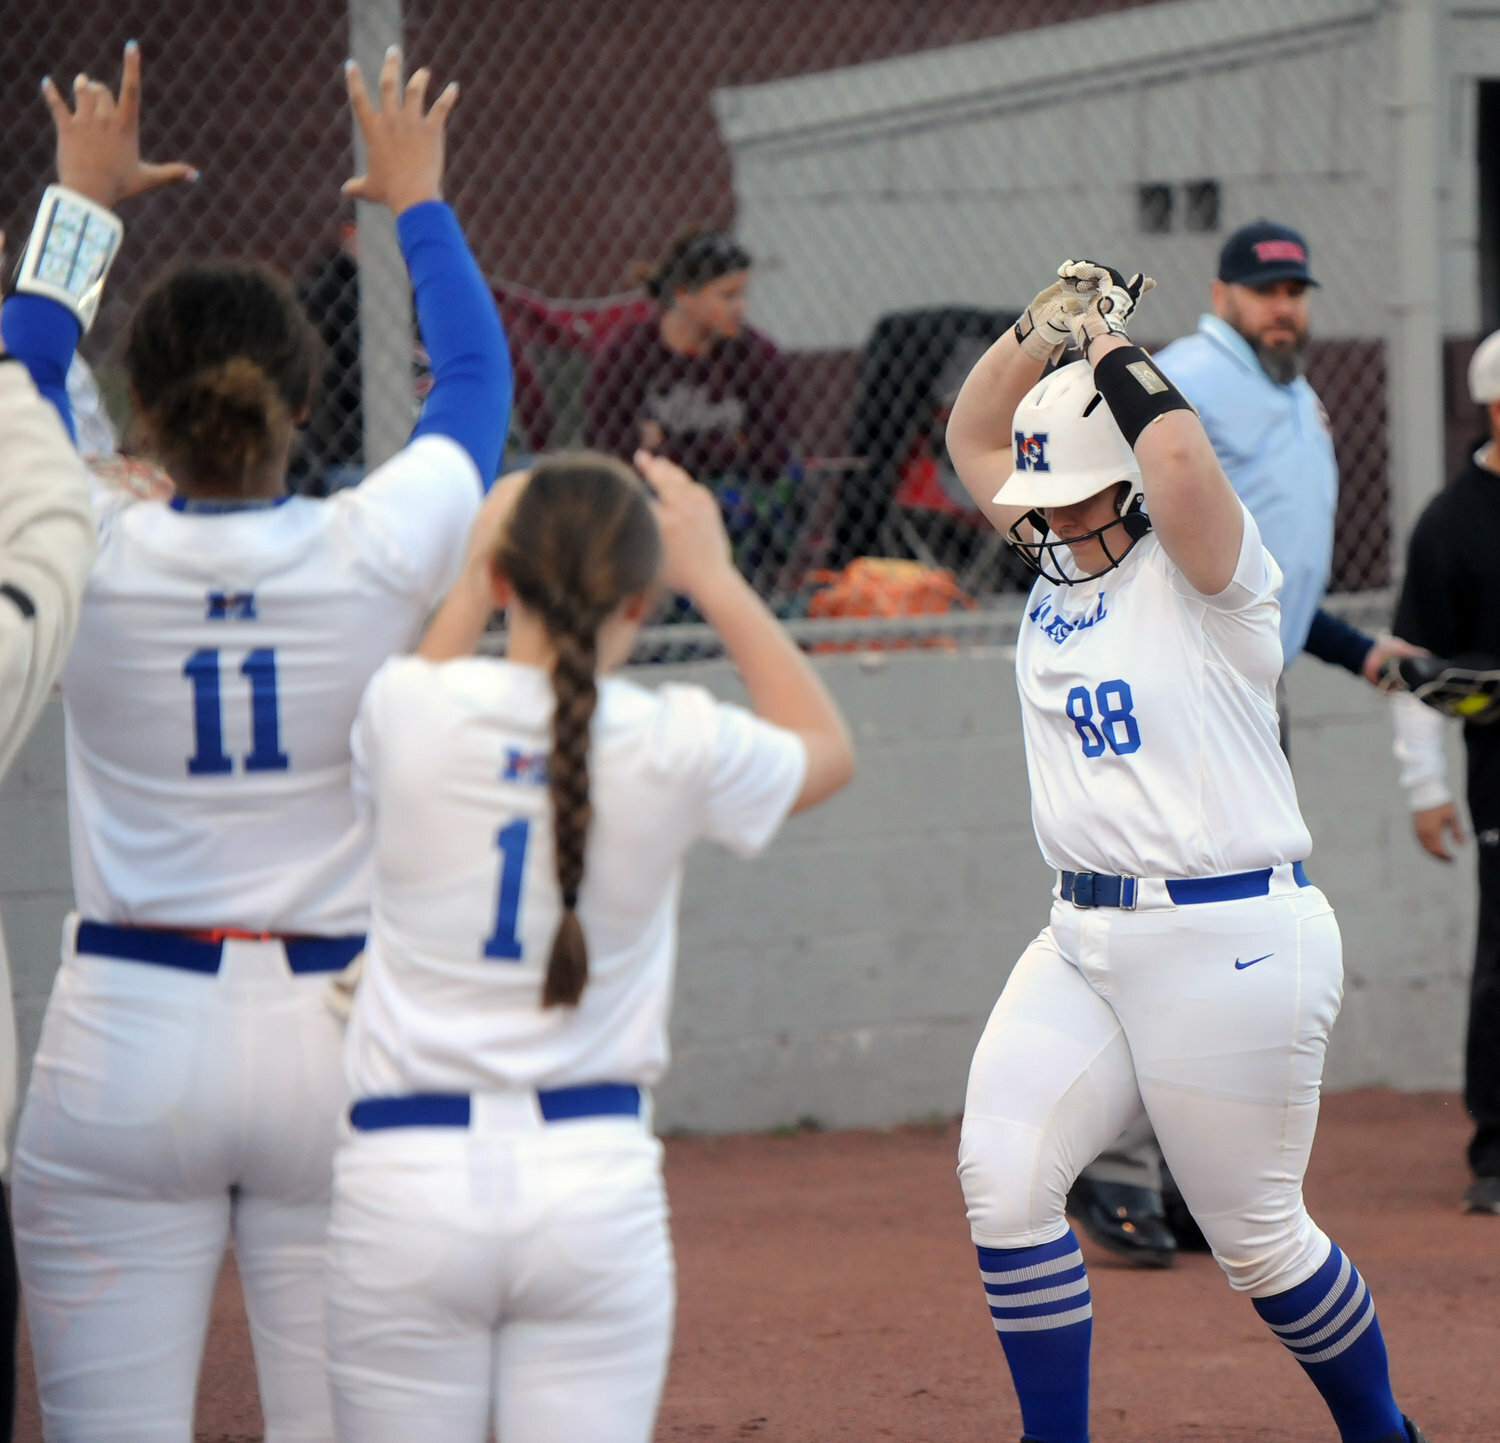 Richardson nears home plate and celebrates after crushing a home run as a junior with the Tigerettes.